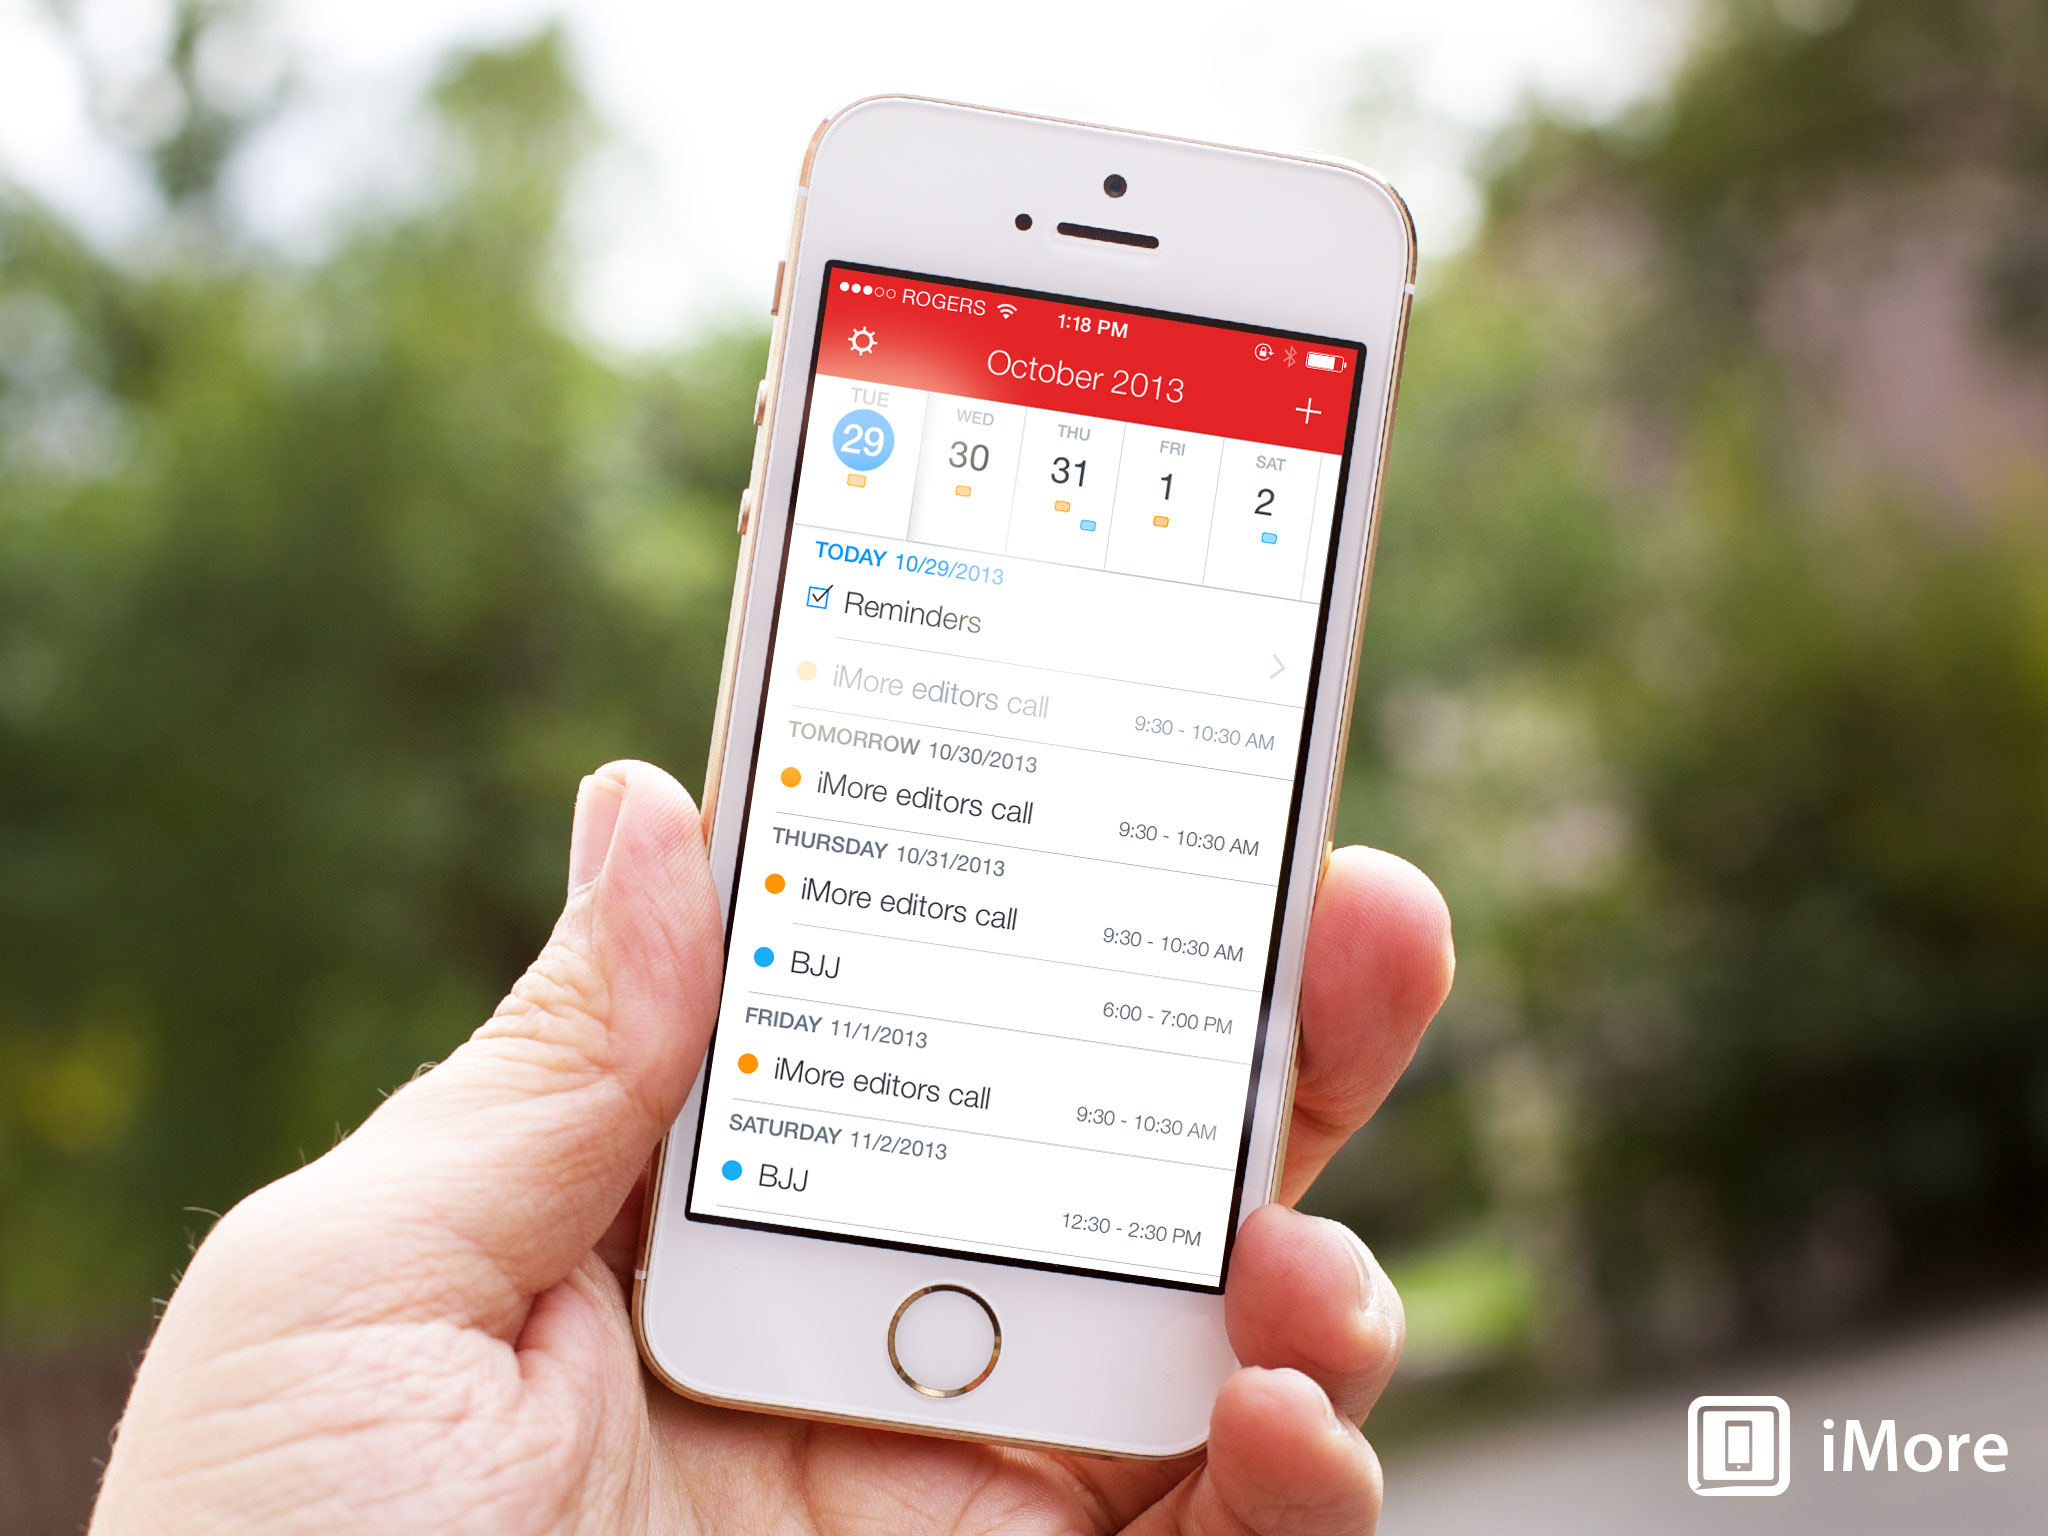 Fantastical 2 updated with new icon badge options, better geofence handling, and more